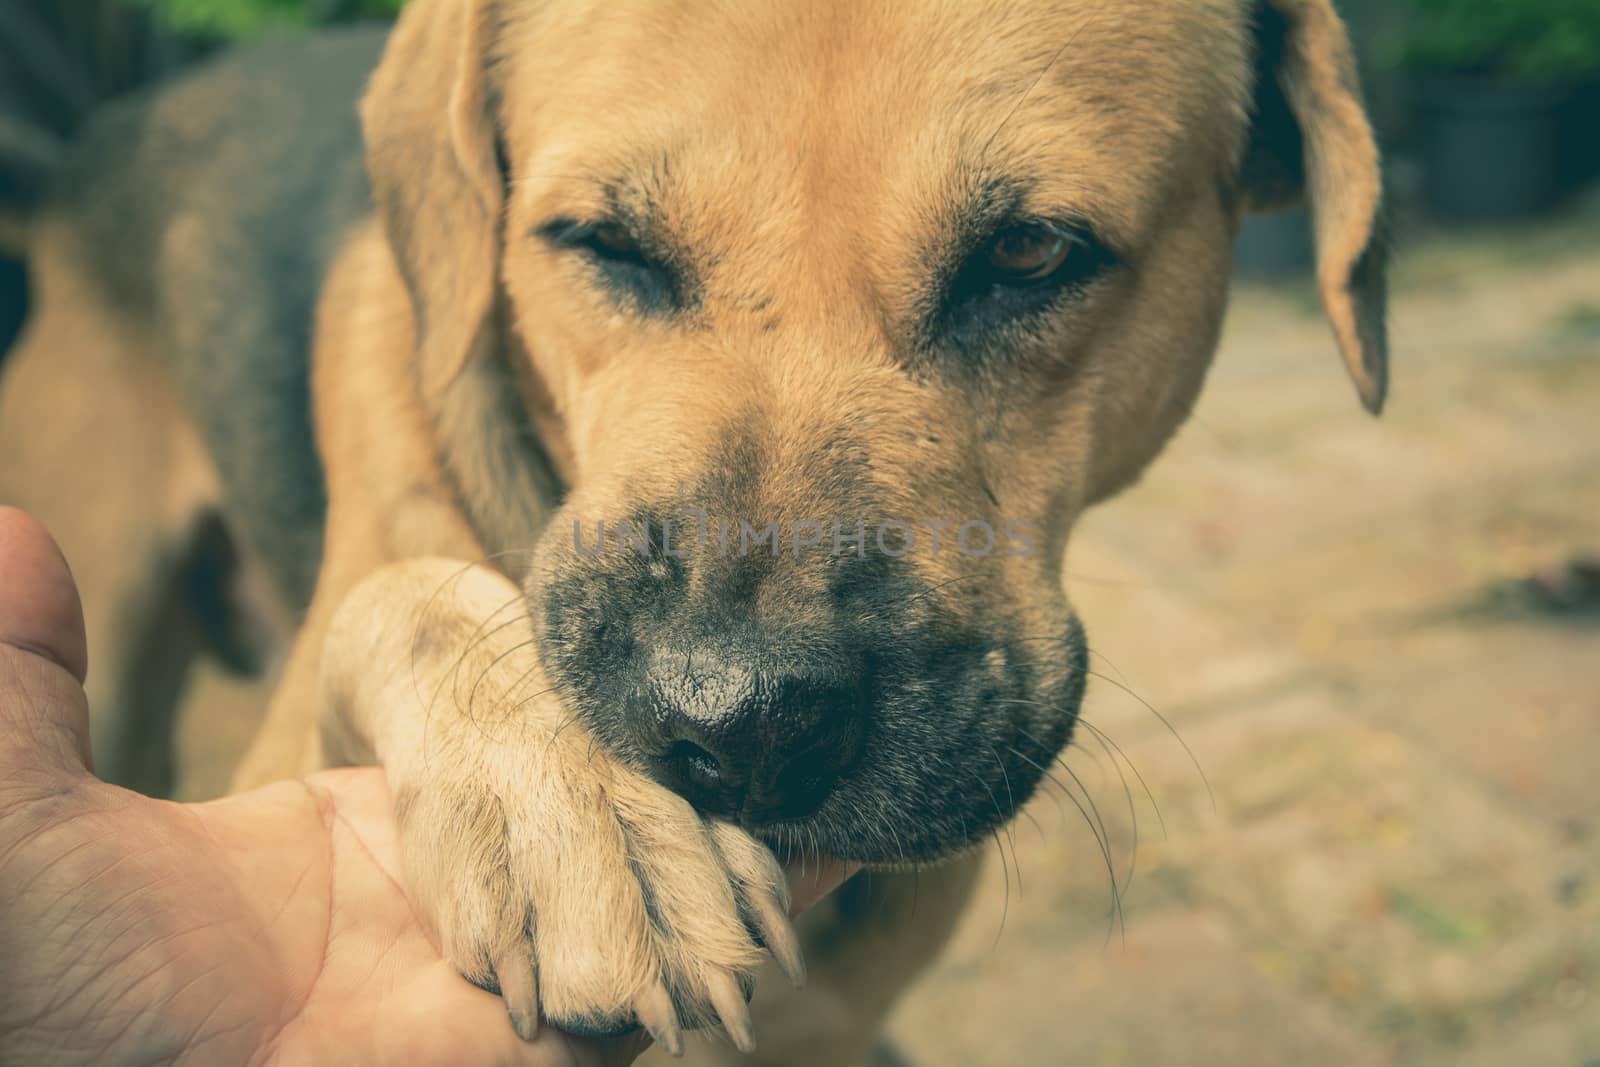 dogs shaking hand with human, friendship between human and dogs. by kirisa99